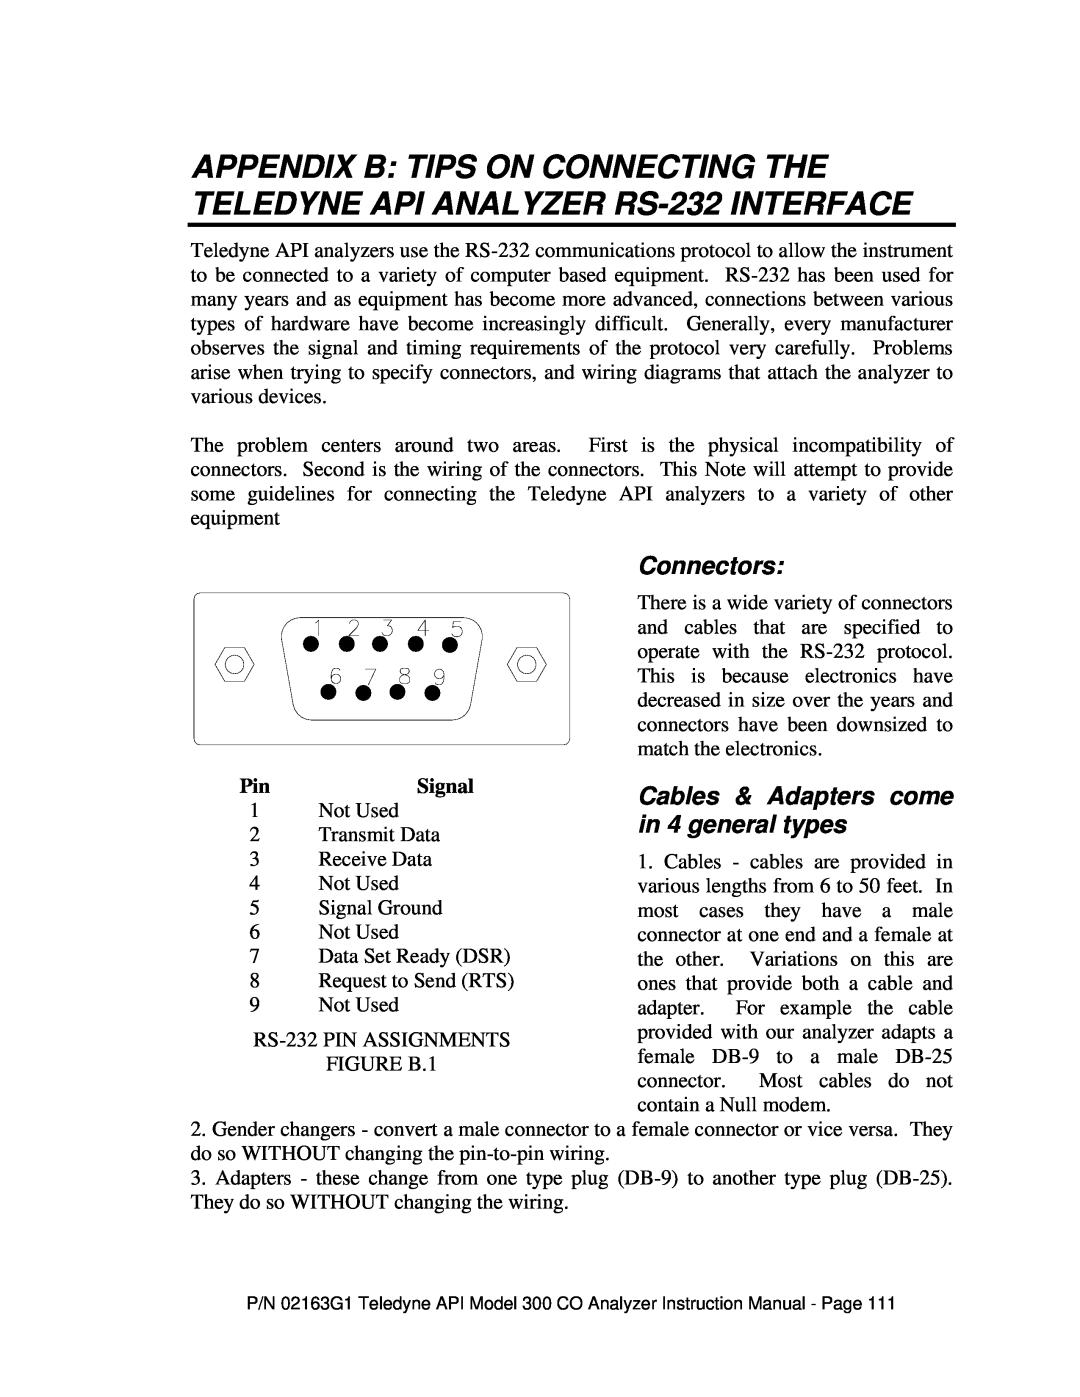 Teledyne 300 instruction manual Connectors, Cables & Adapters come, in 4 general types, Signal 